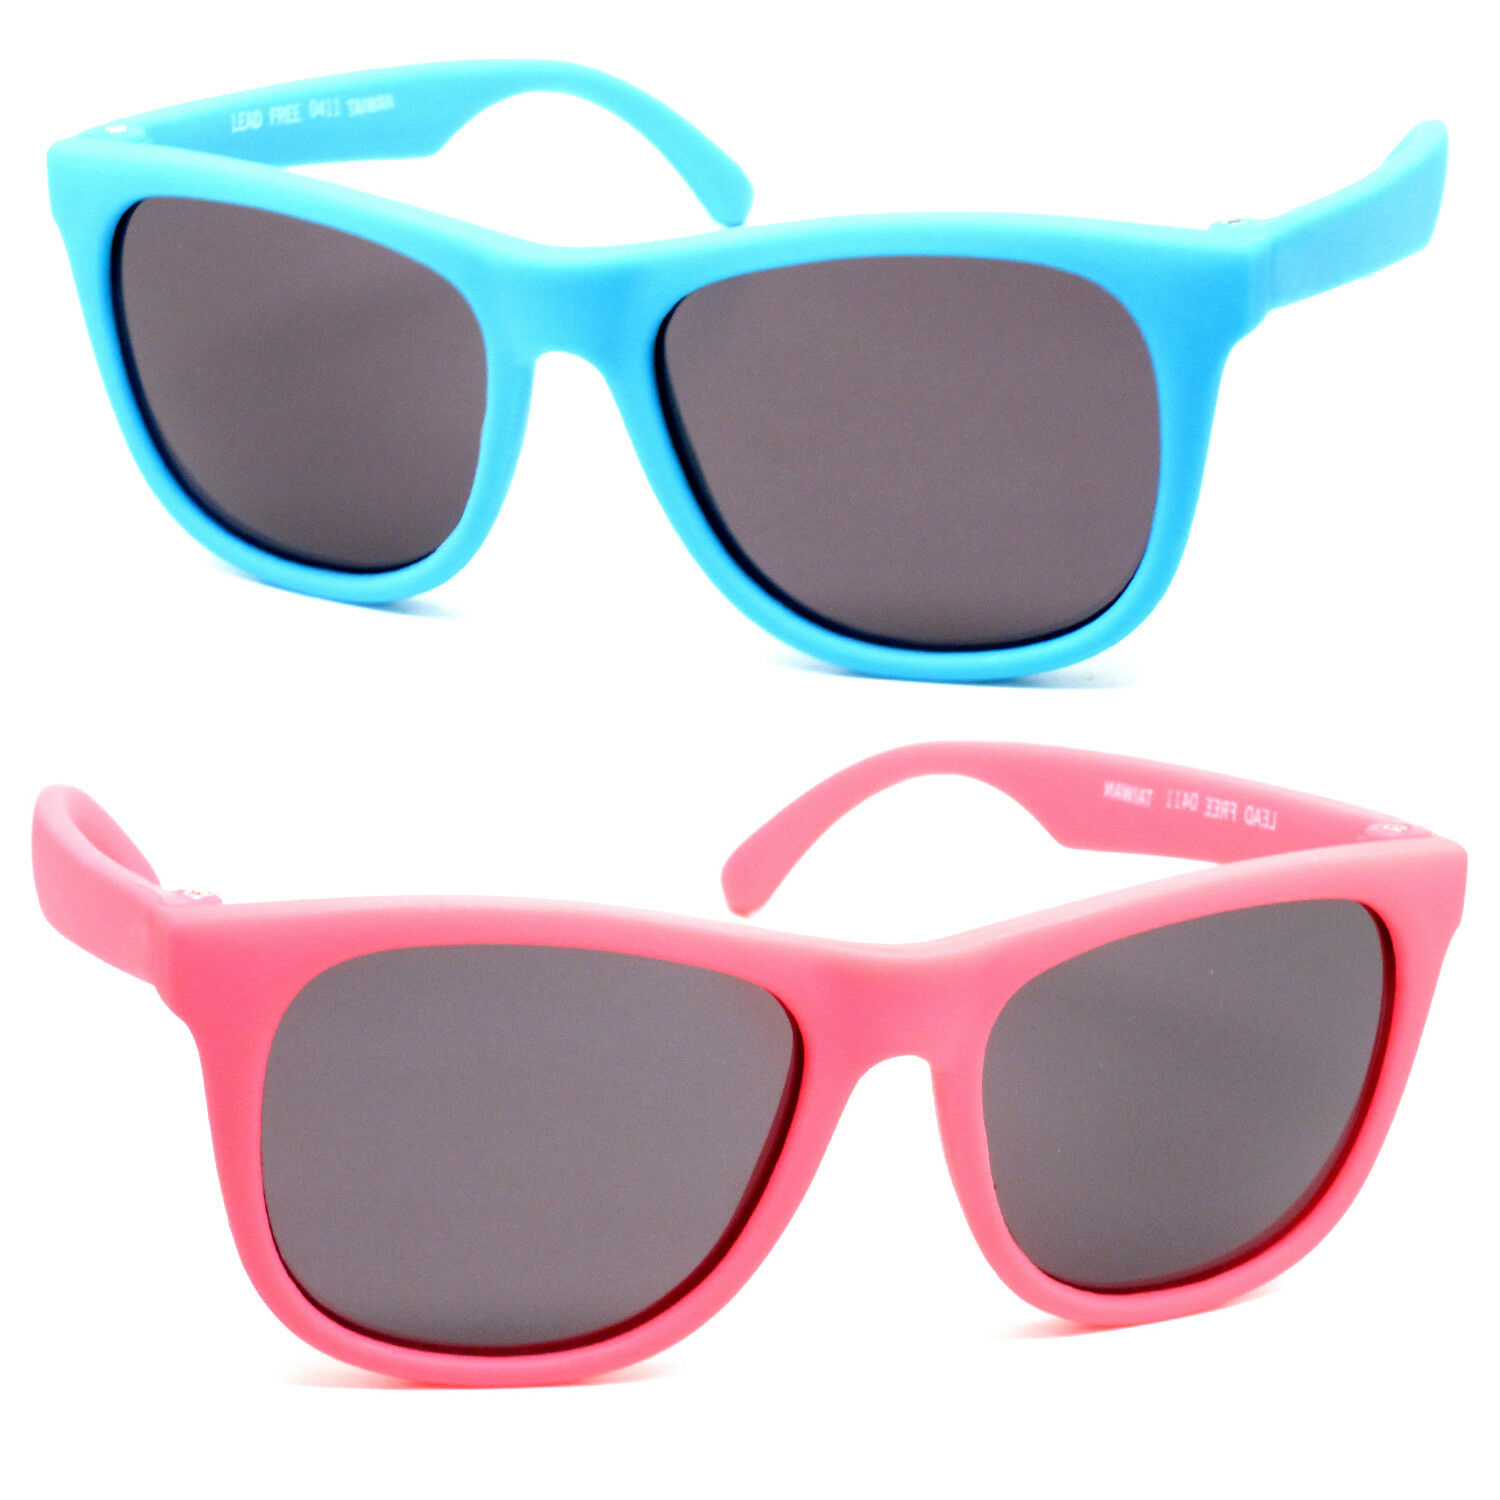 Baby Boy Girl Infant Sunglasses Here Adorable Safe Made Of Rubber Not Plastic